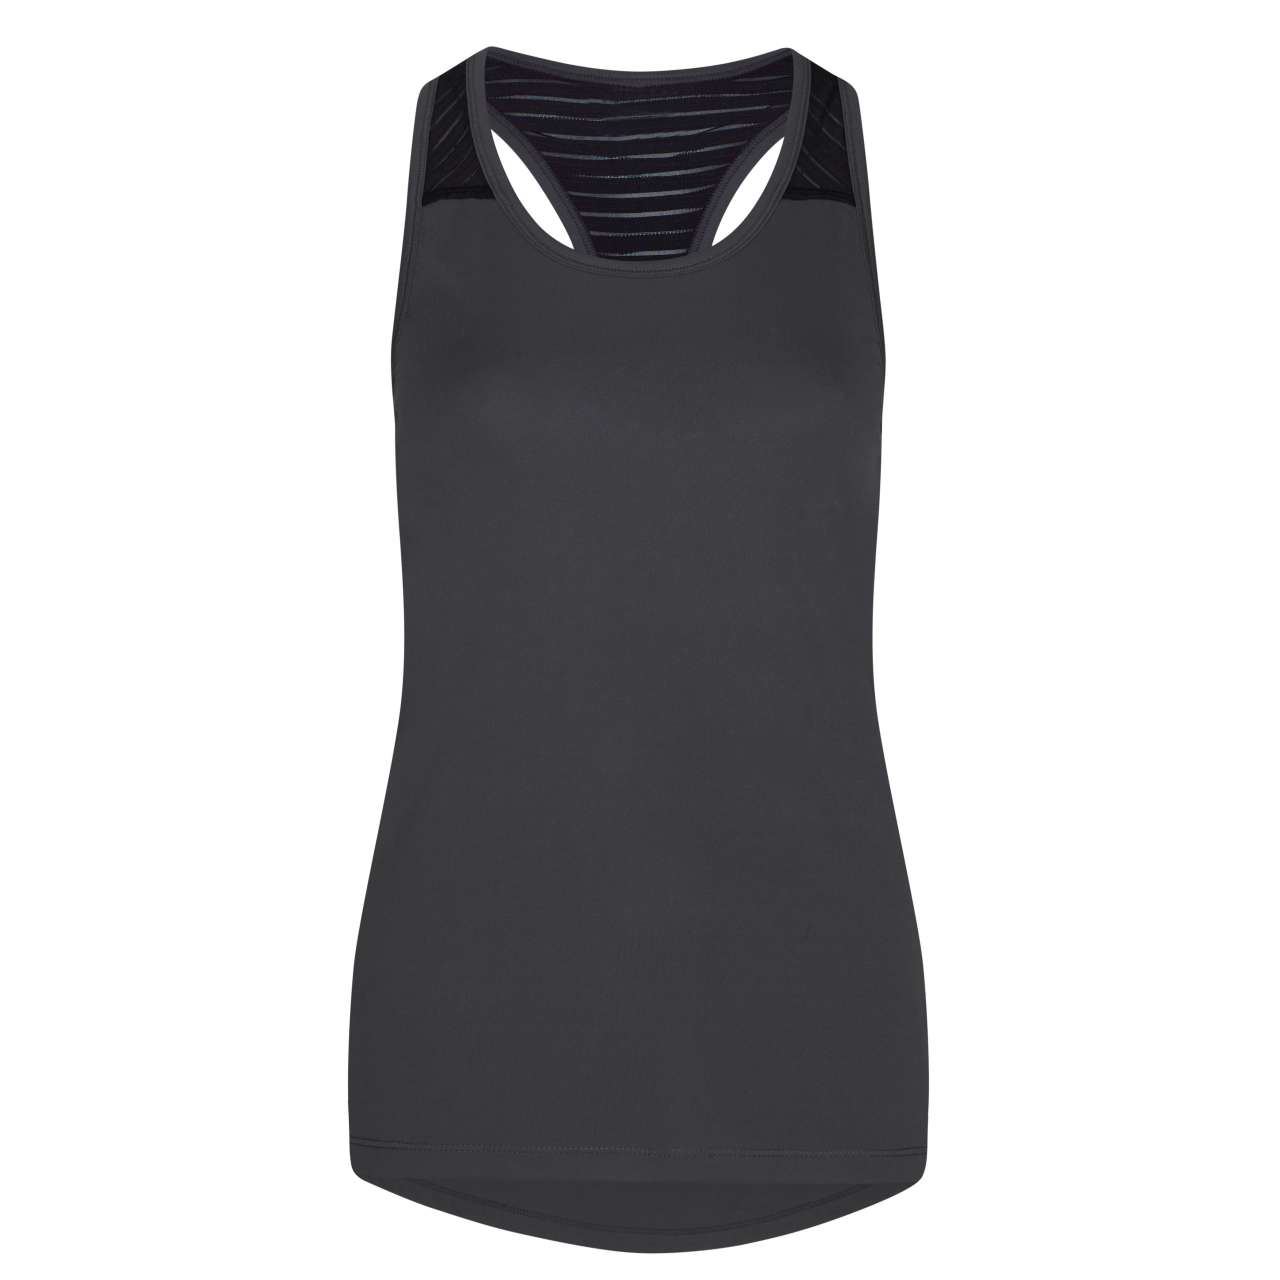 Promo  WOMEN'S COOL SMOOTH WORKOUT VEST